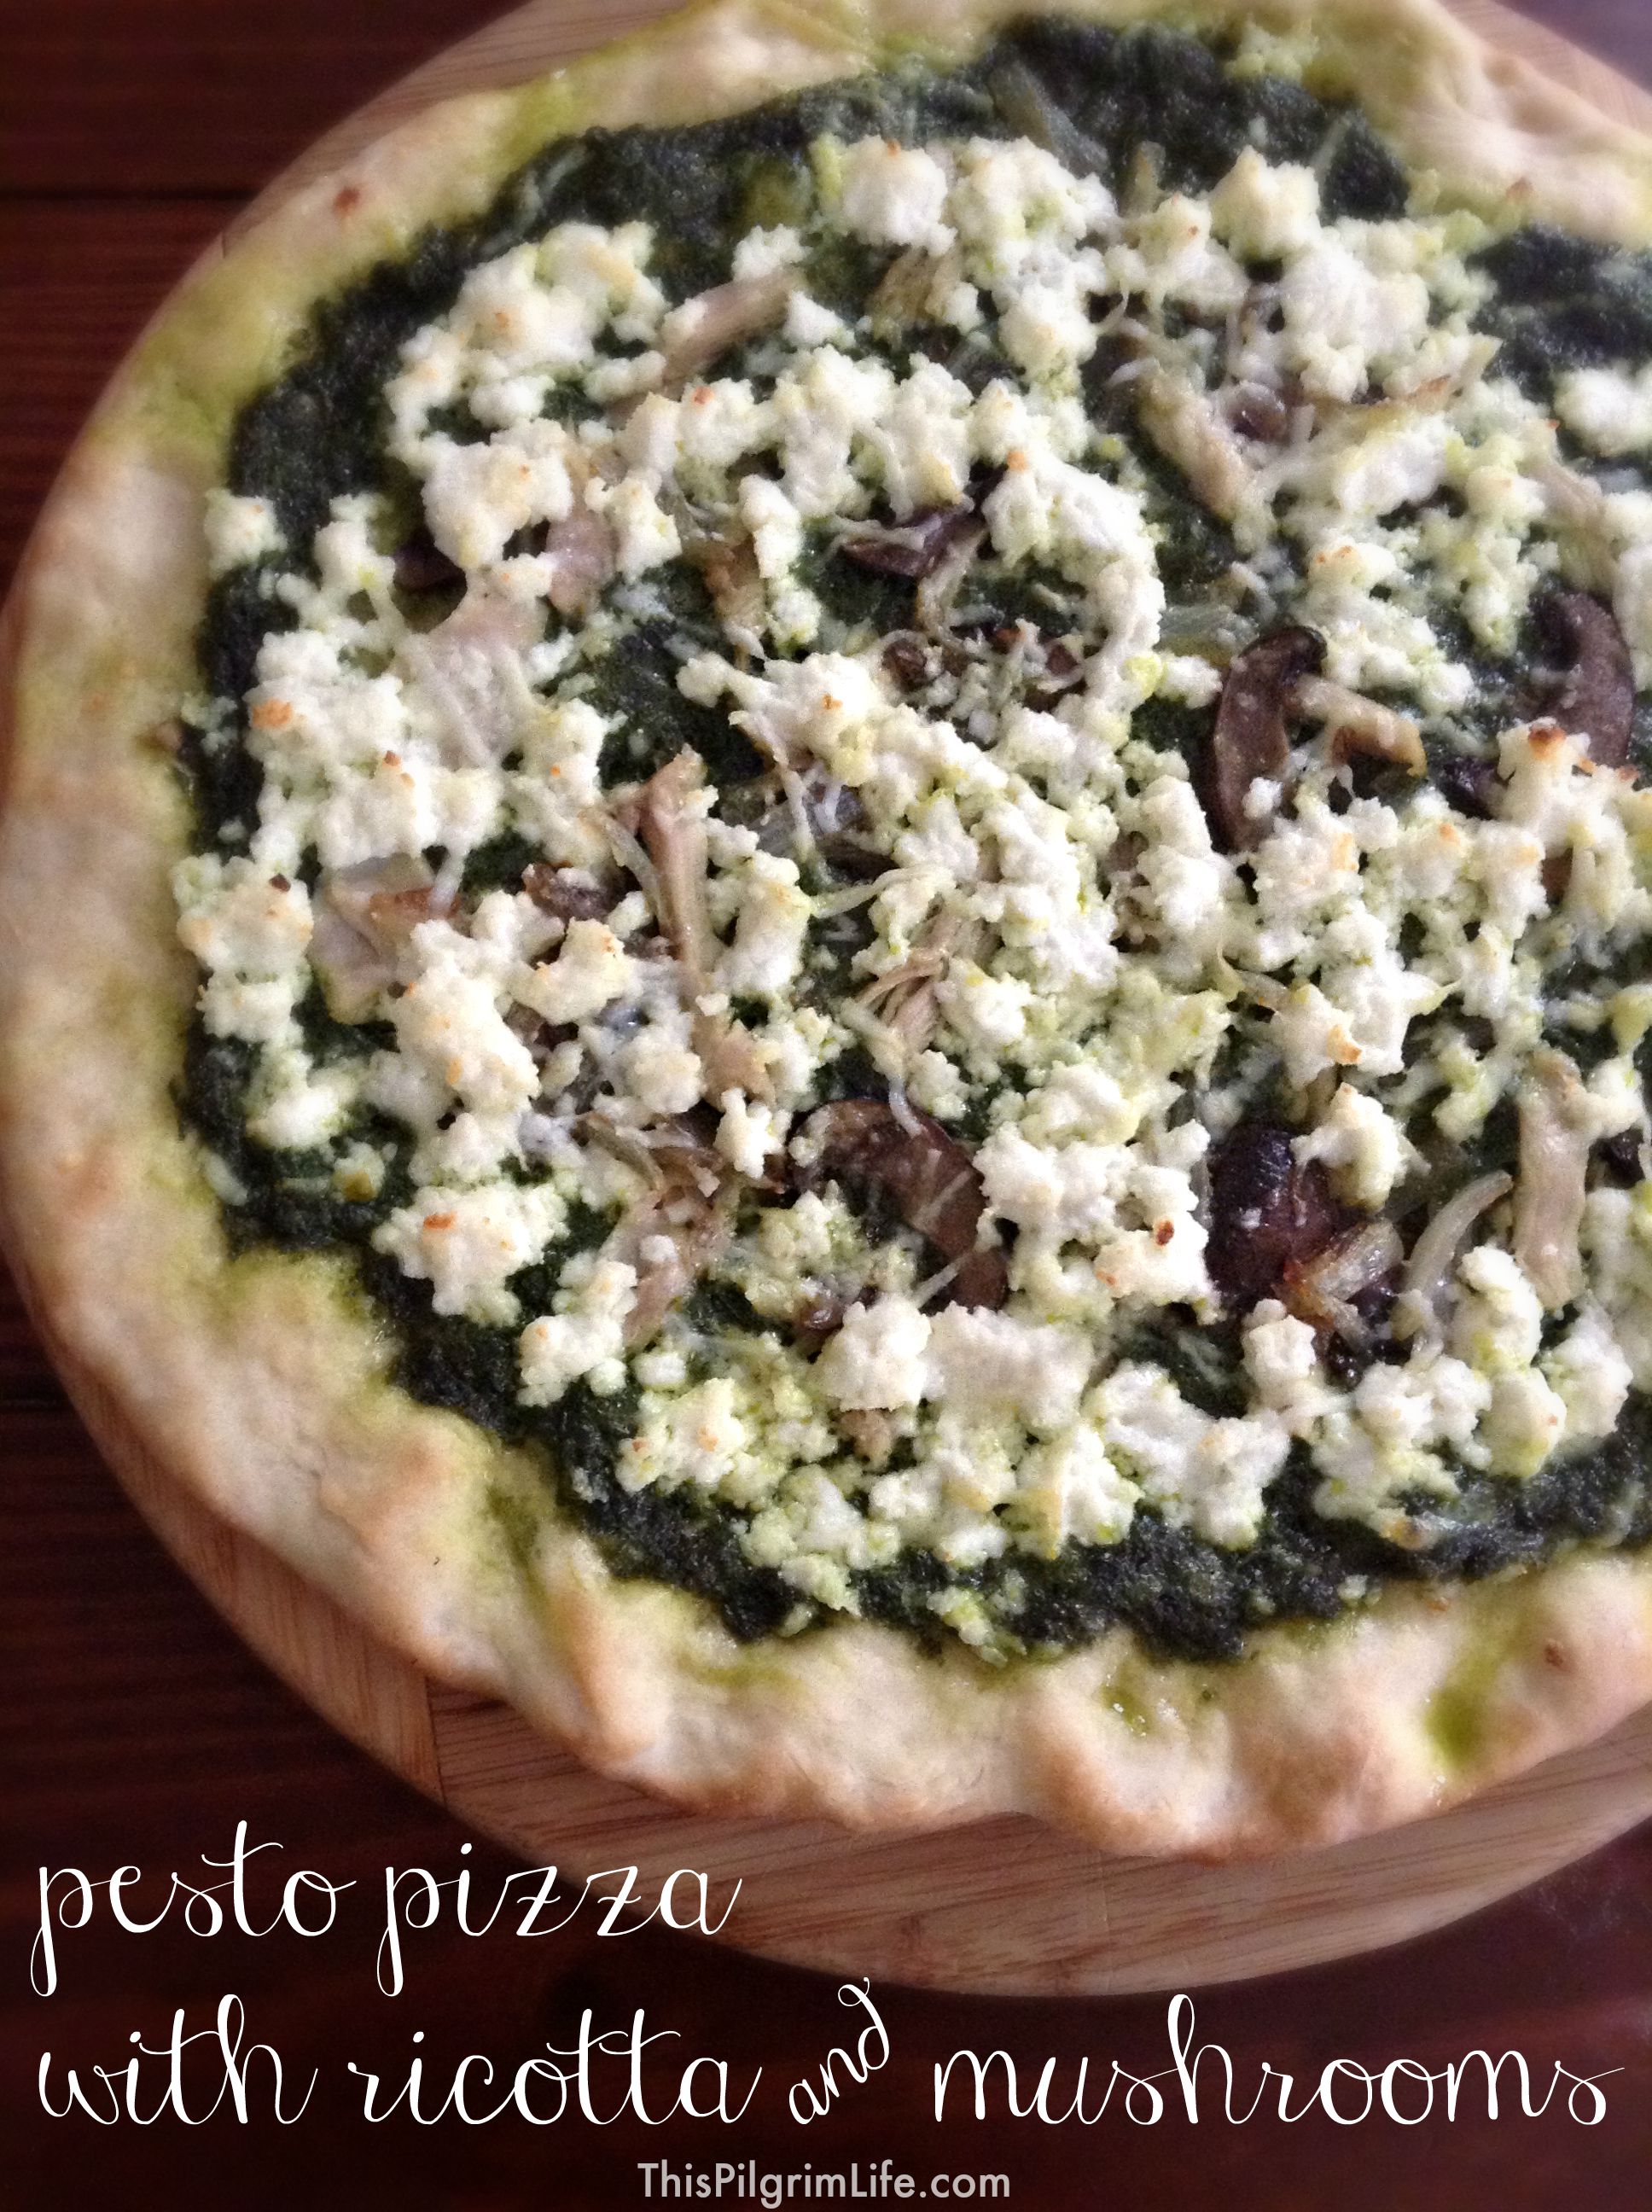 I LOVE homemade pizza, especially when it can be made quickly with ingredients I already have on hand like this pesto pizza! 